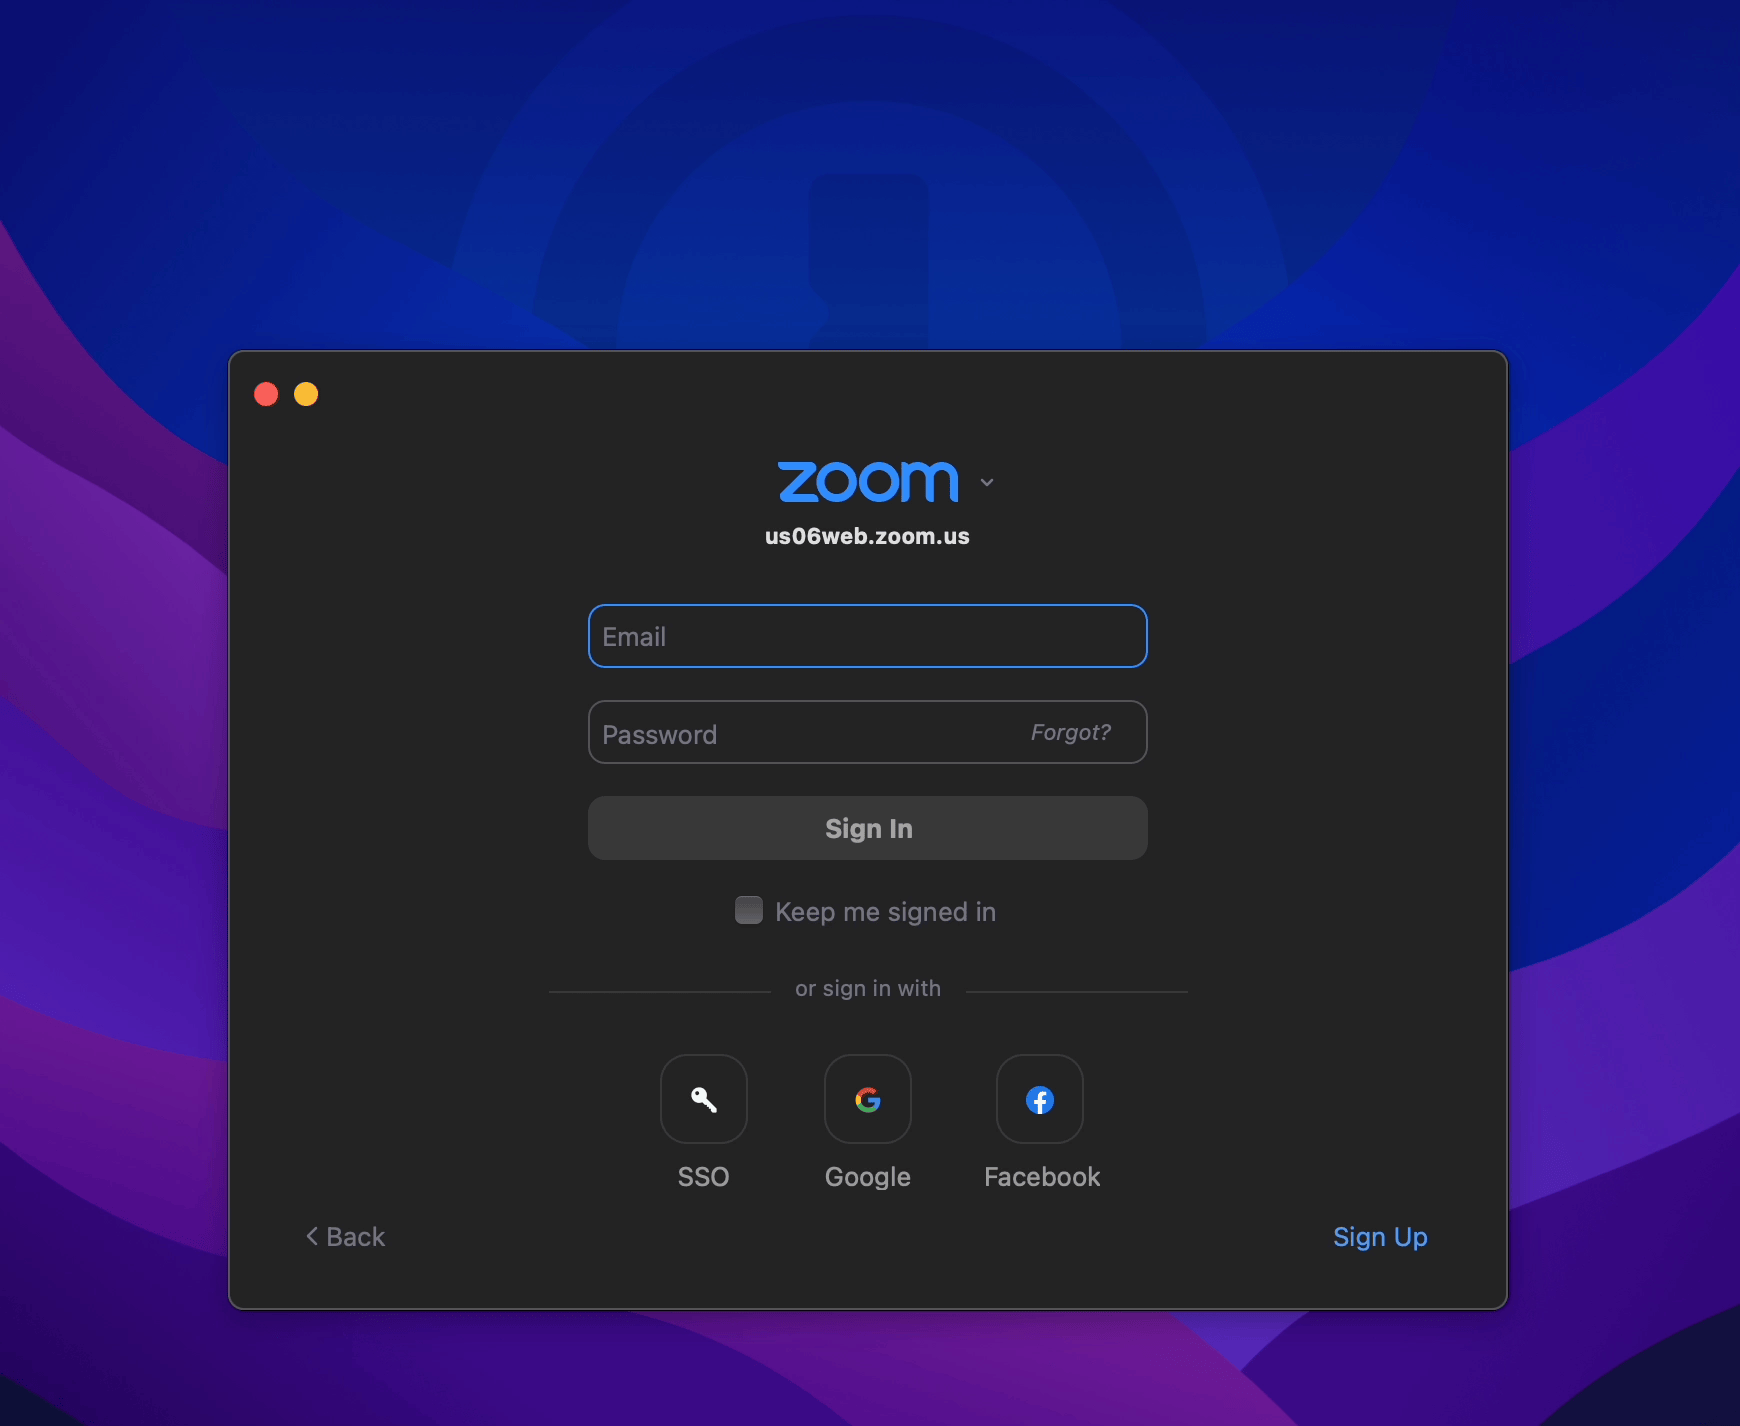 An animated gif showing 1Password filling the Zoom app's login screen, including username, password, and one-time 2FA code.